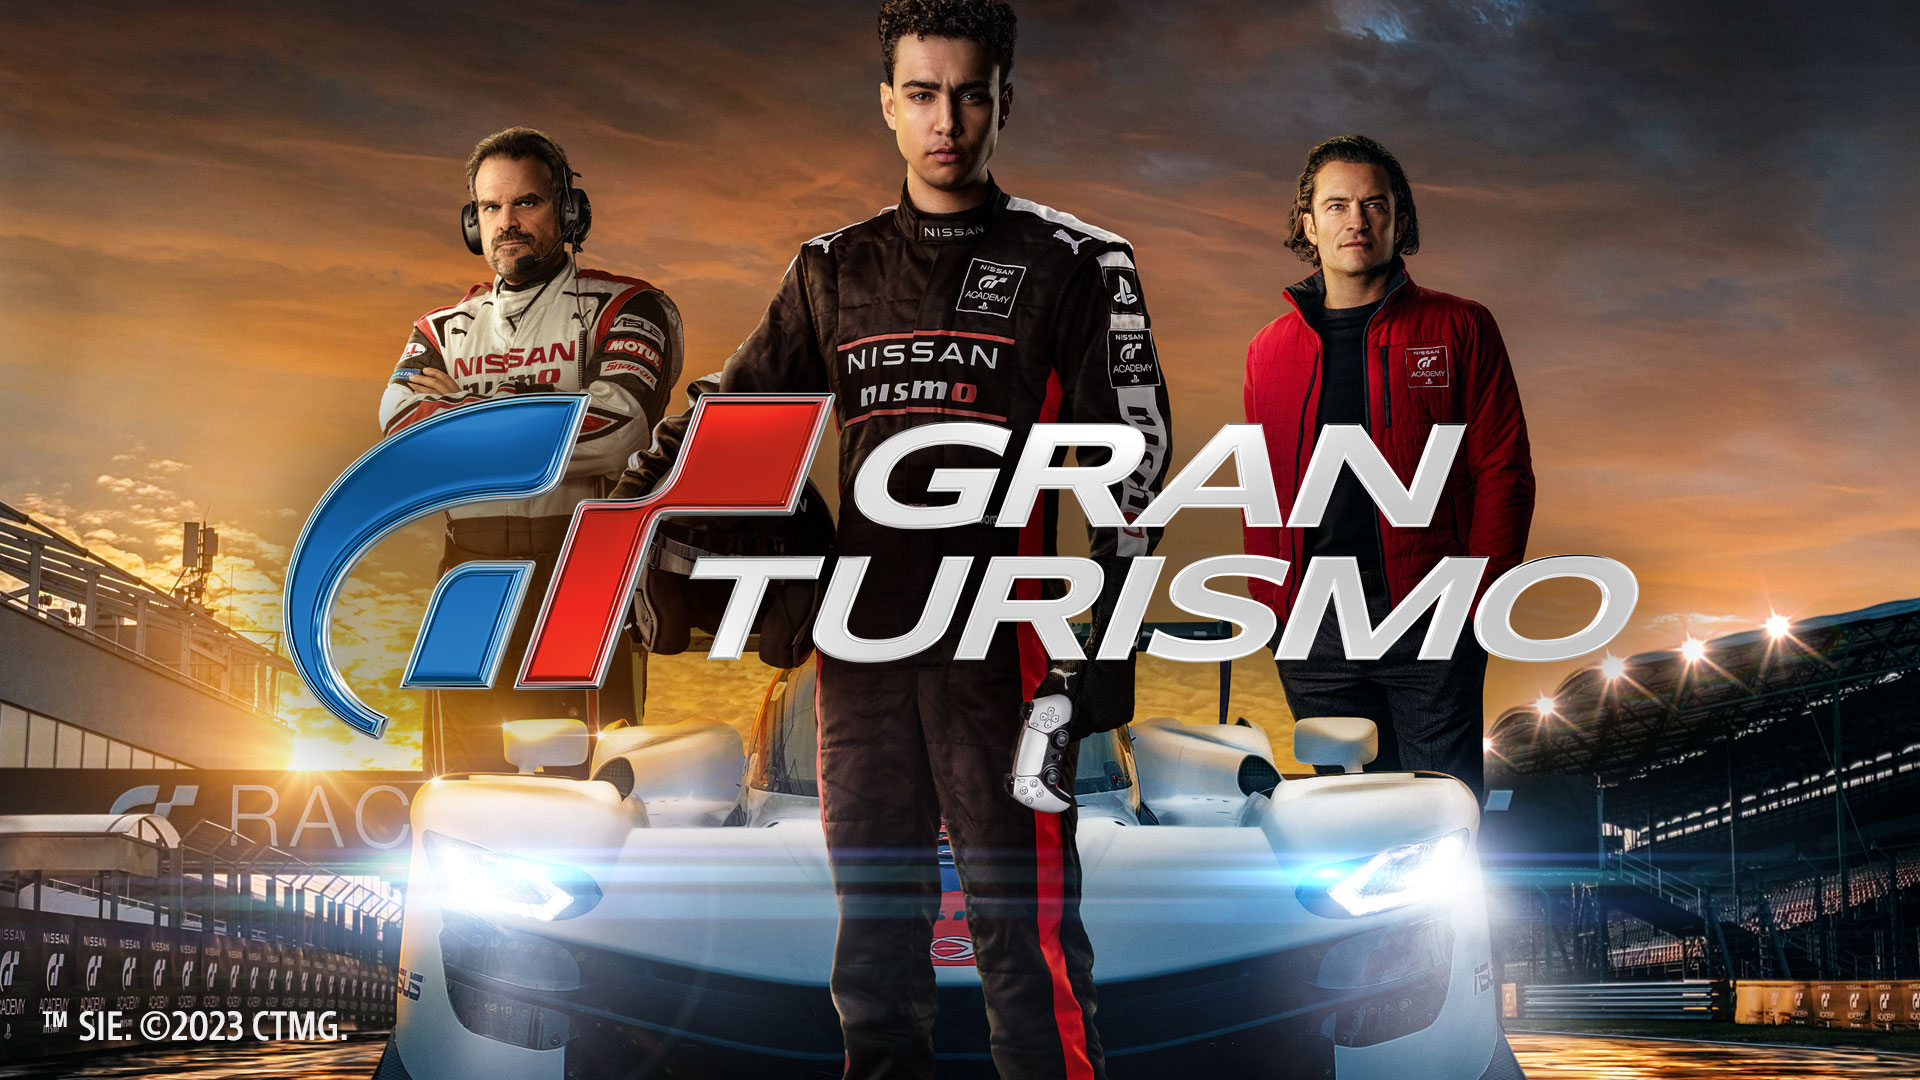 “Gran Turismo” Review by Marcus Blake